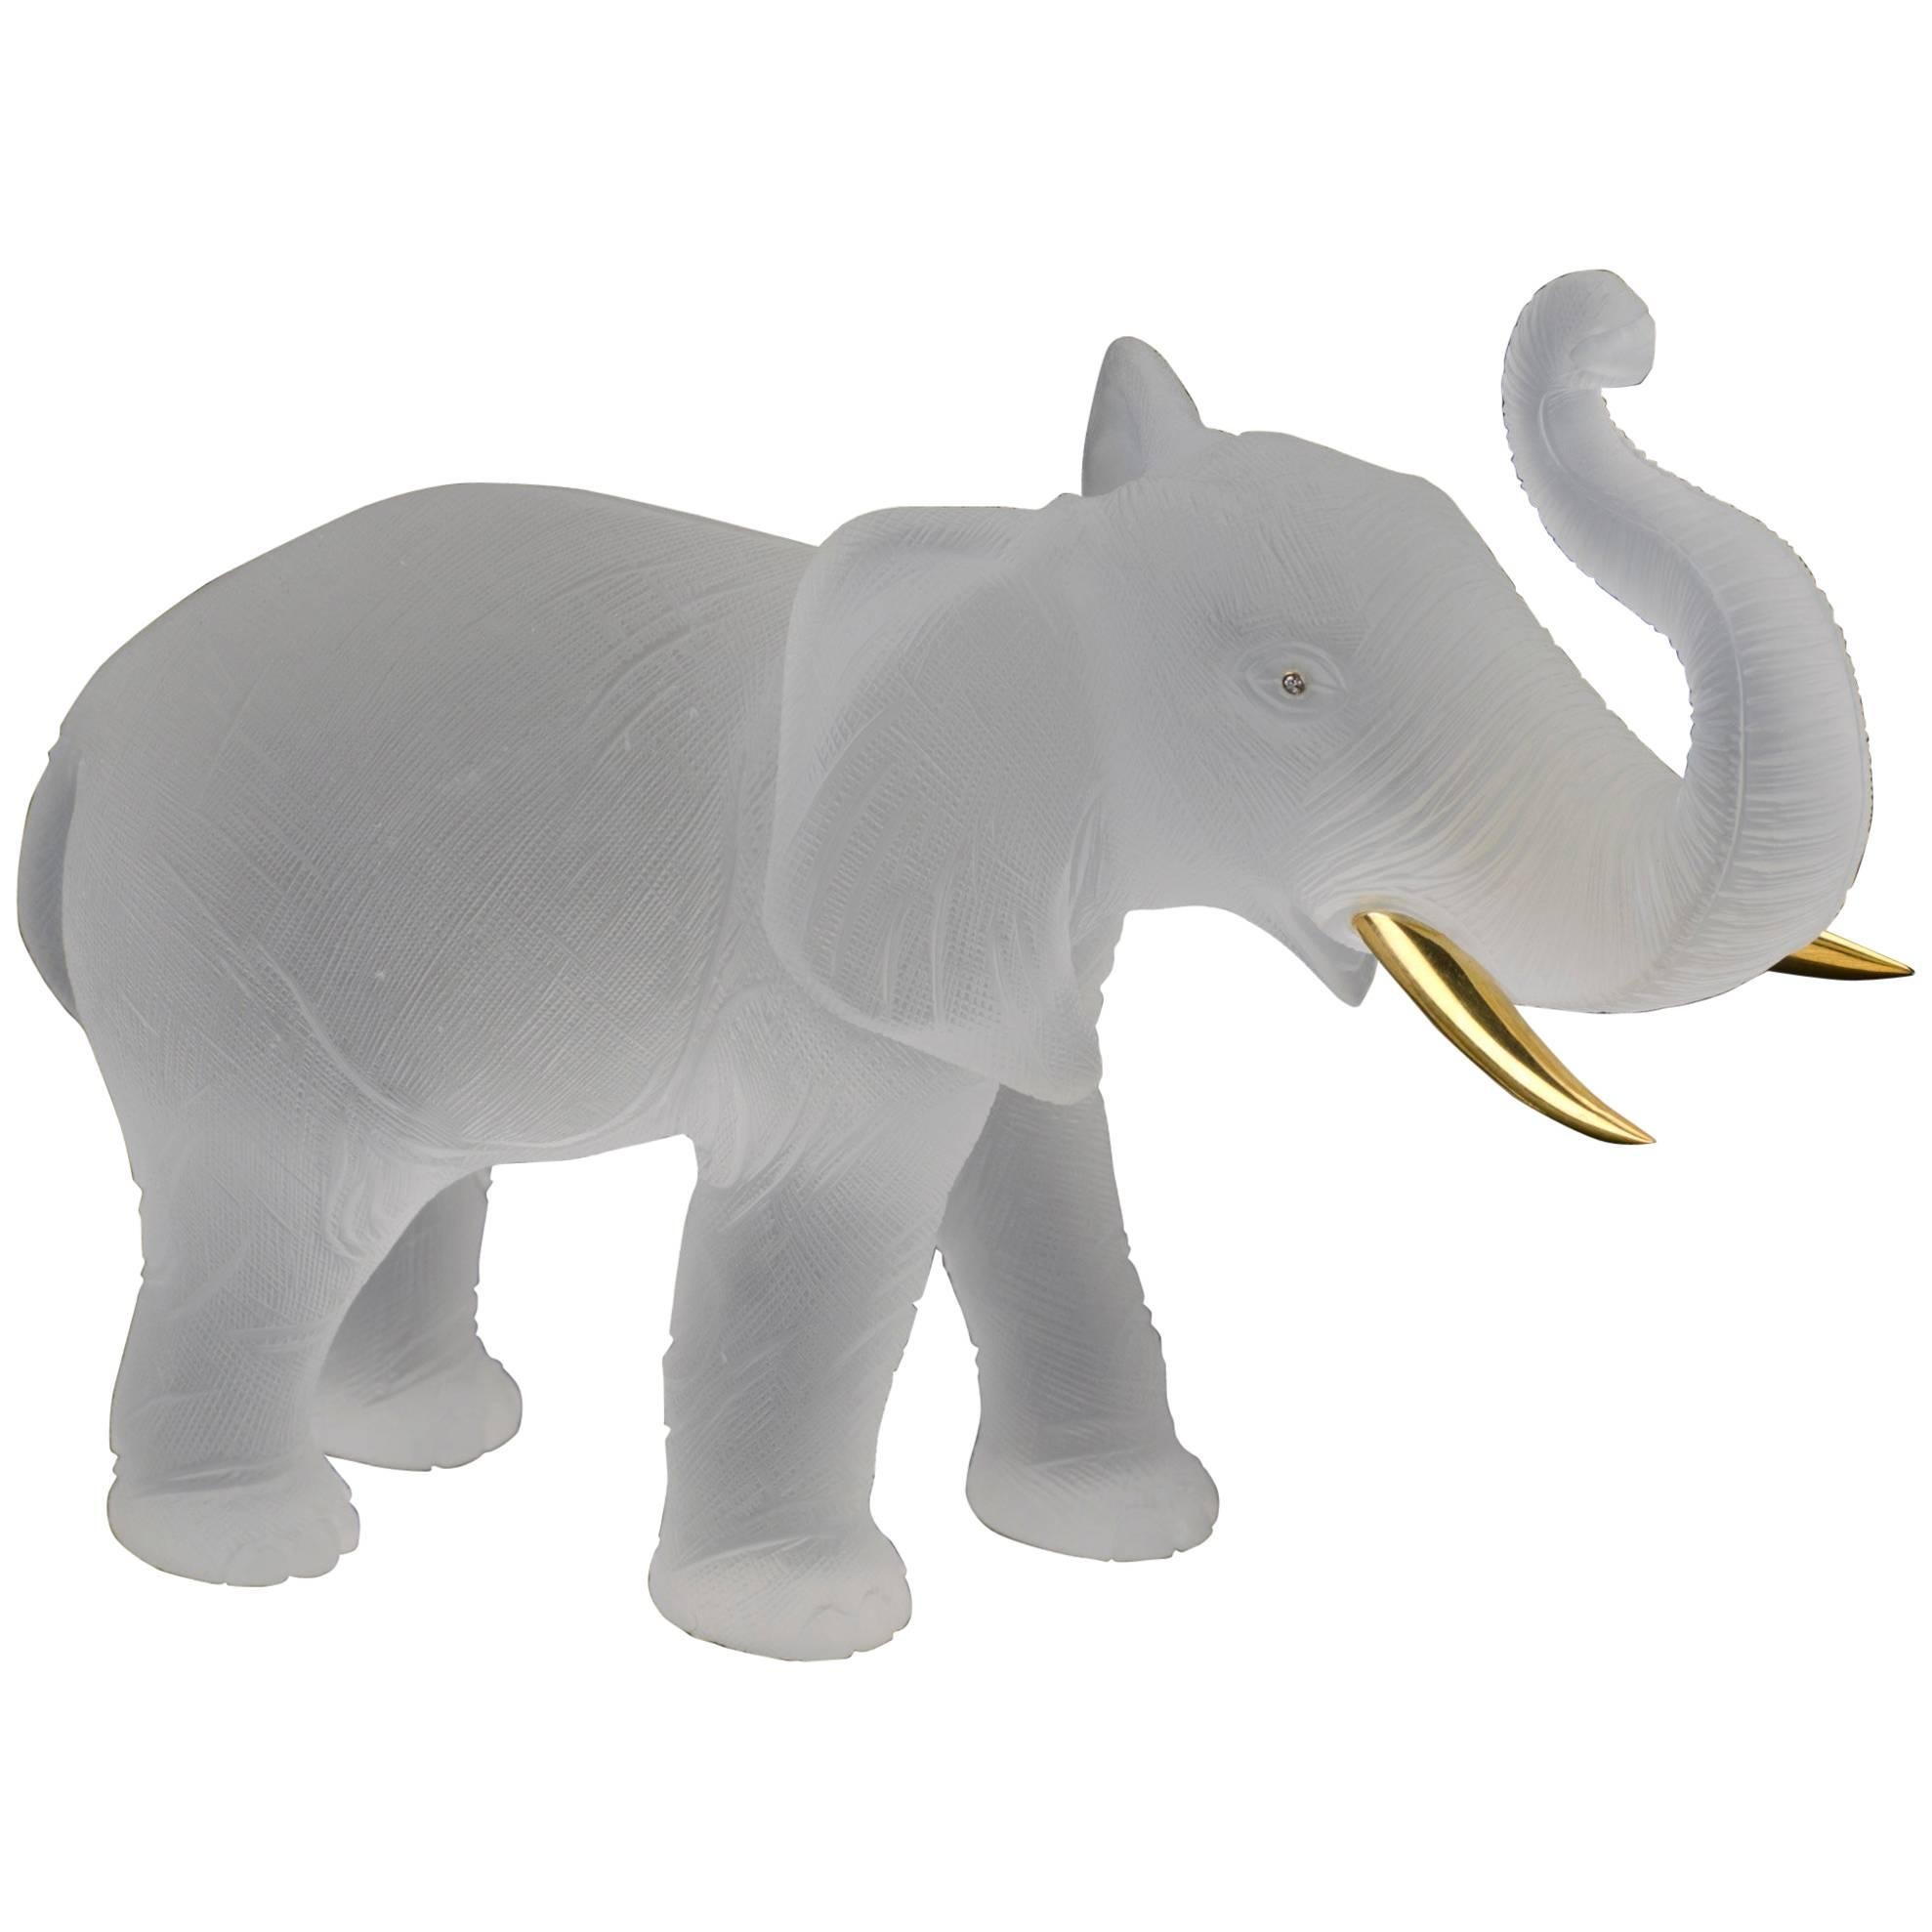 Rockcrystal Elephant with 18 Carat Yellow Gold Tusks For Sale